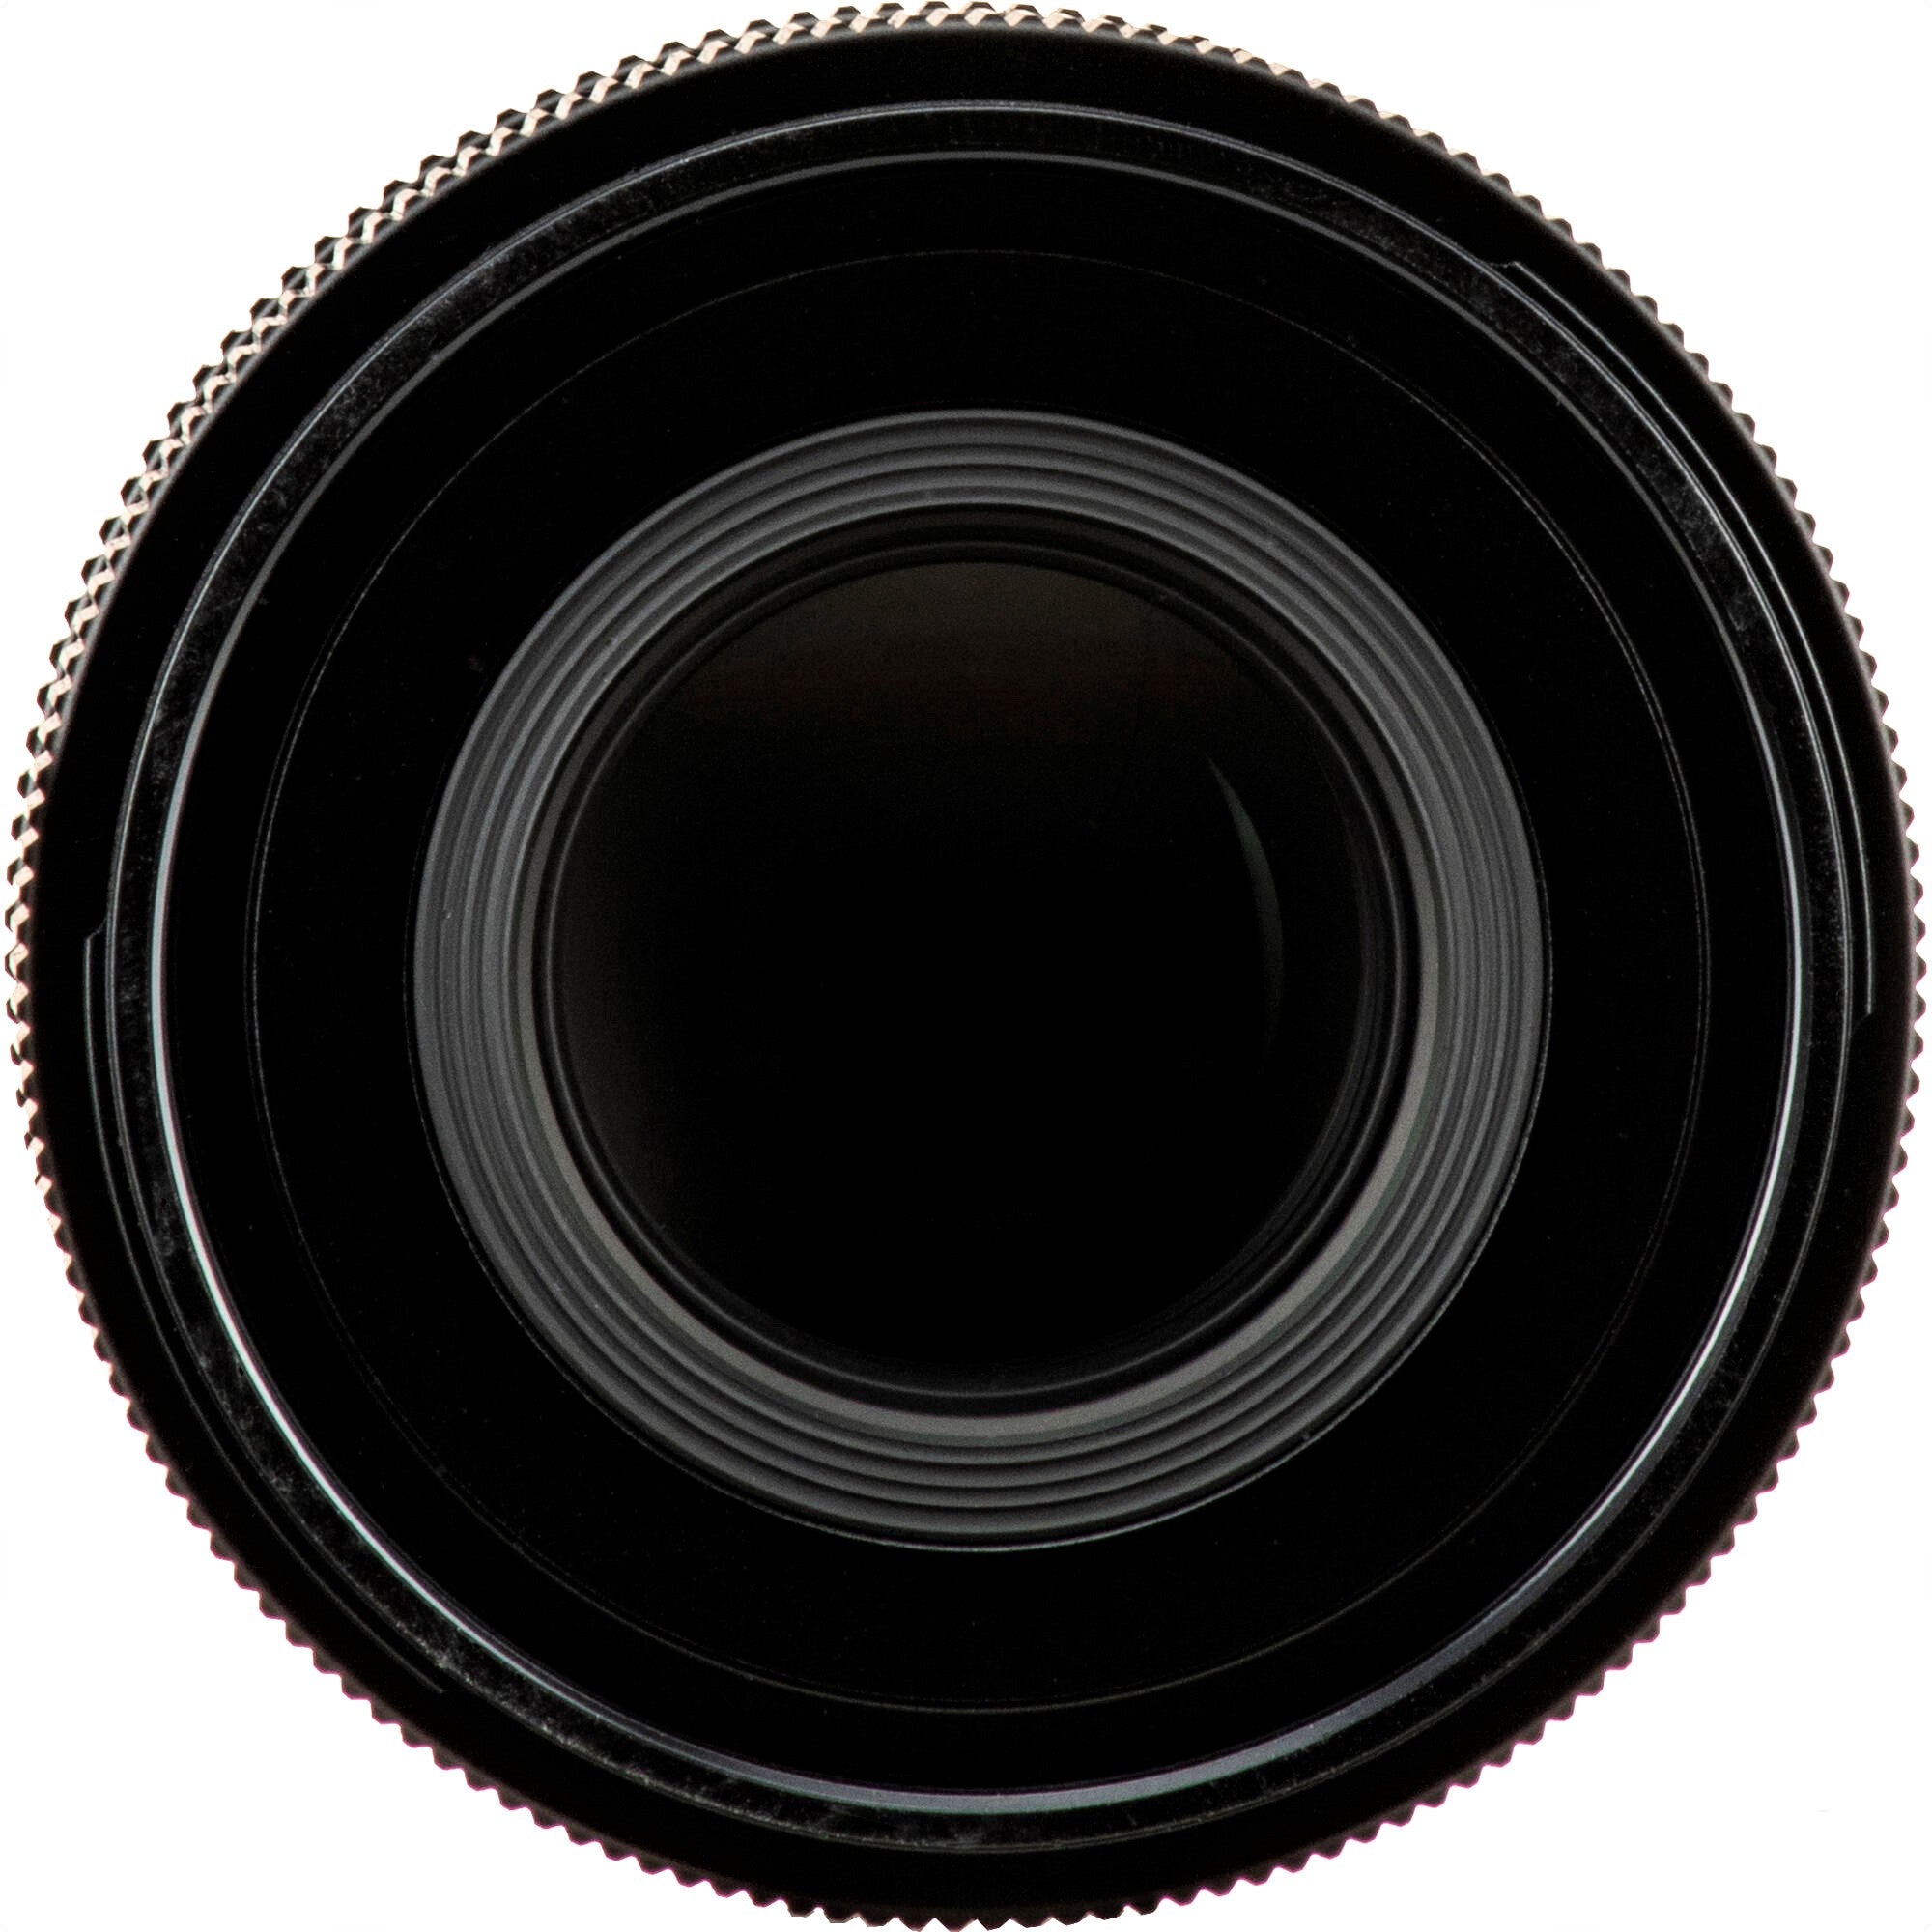 Sigma 65mm F2.0 DG DN Contemporary Lens for Sony E in a Front Close-Up View